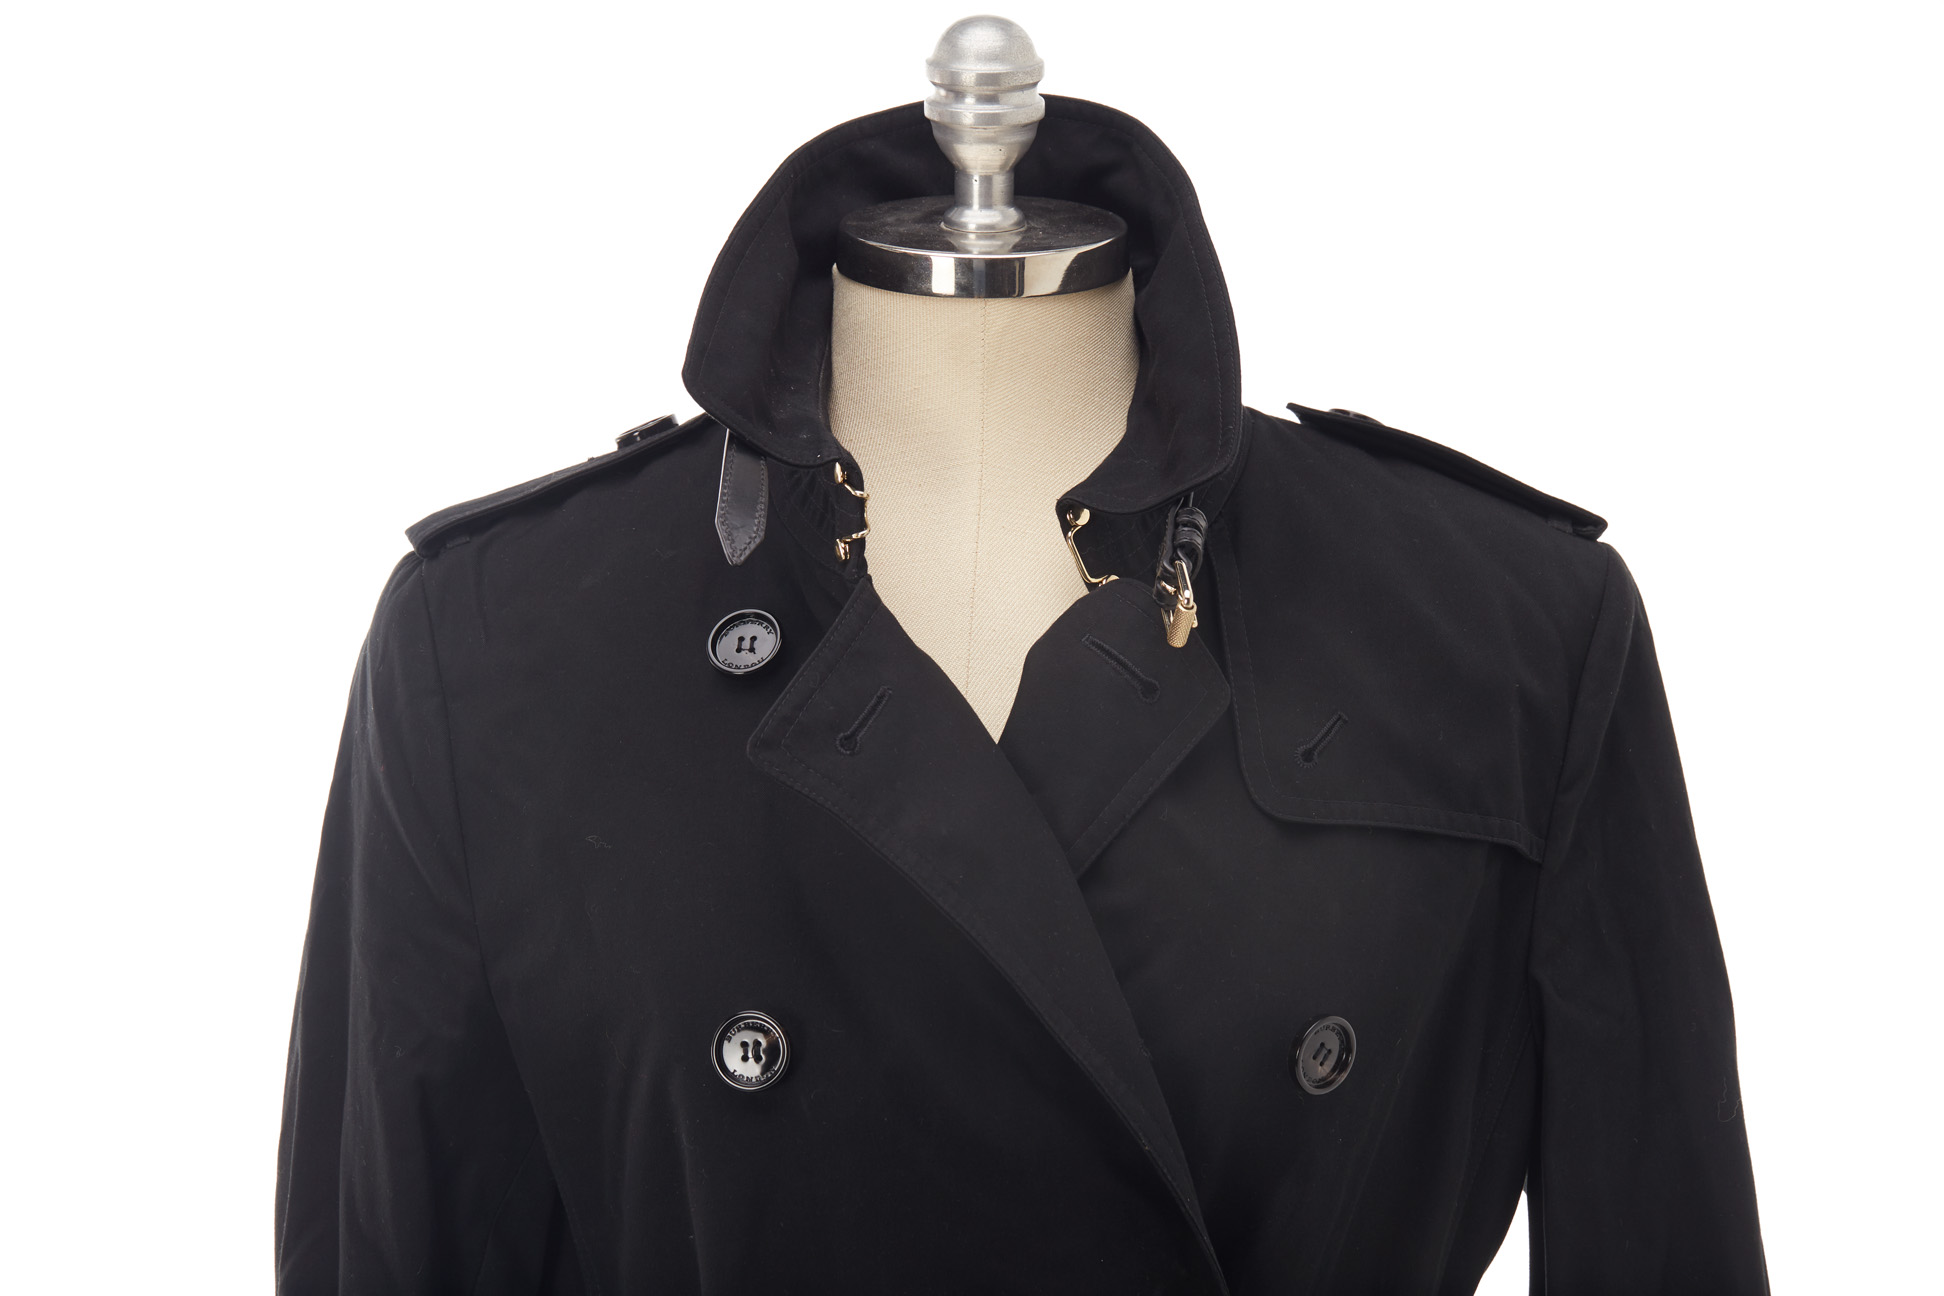 A BURBERRY BLACK MID-LENGTH TRENCH COAT - Image 2 of 5